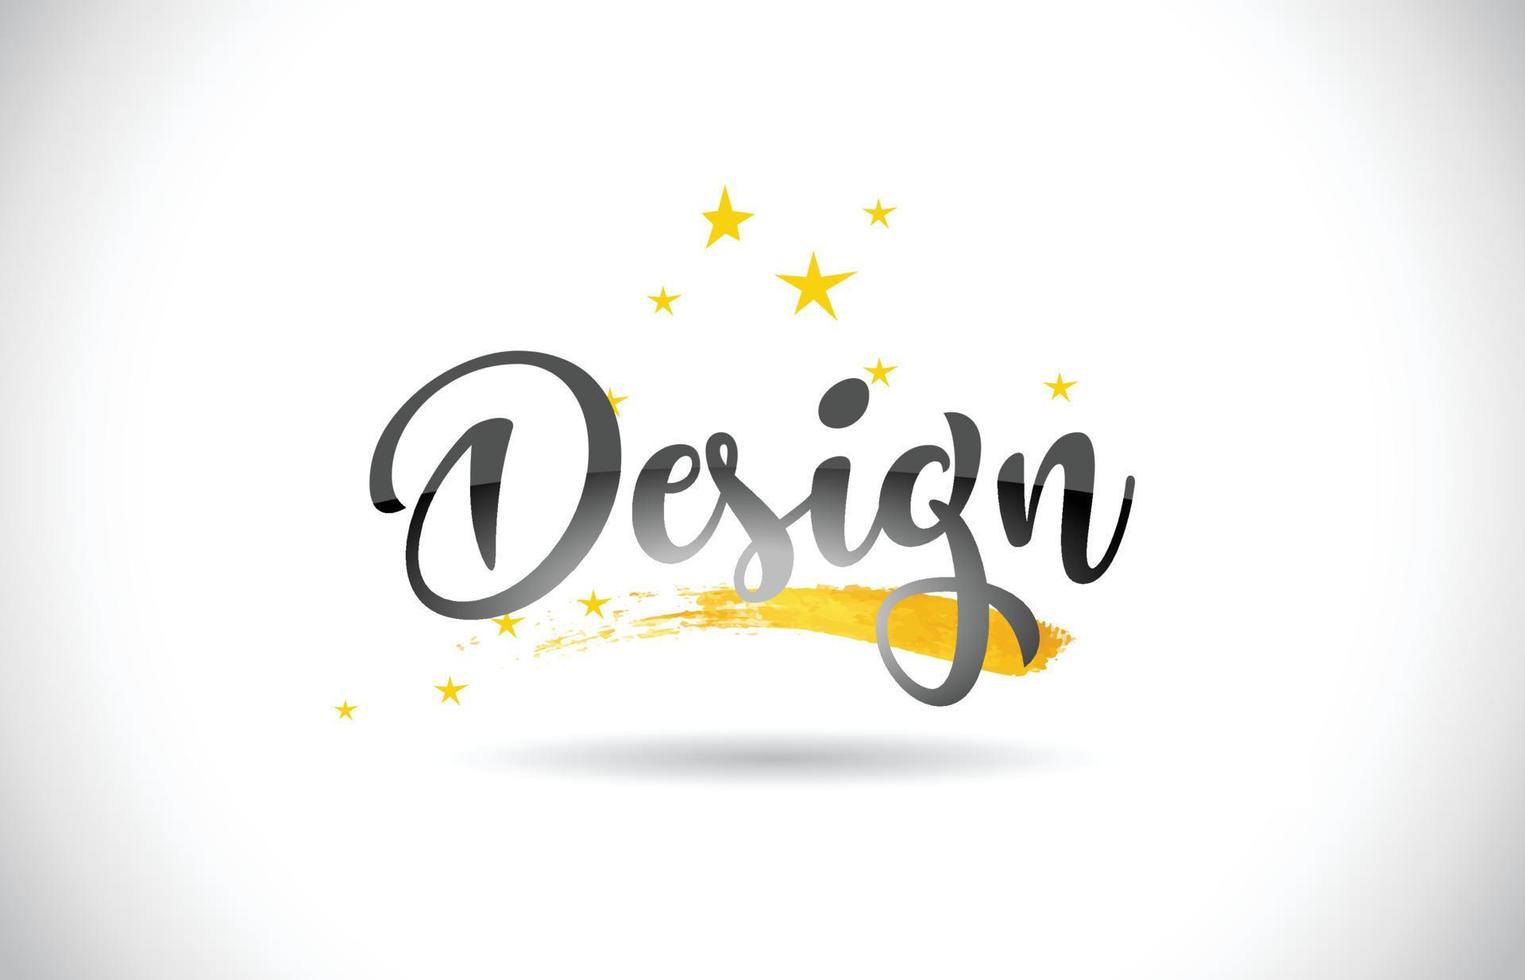 Design Word Vector Text with Golden Stars Trail and Handwritten Curved Font.